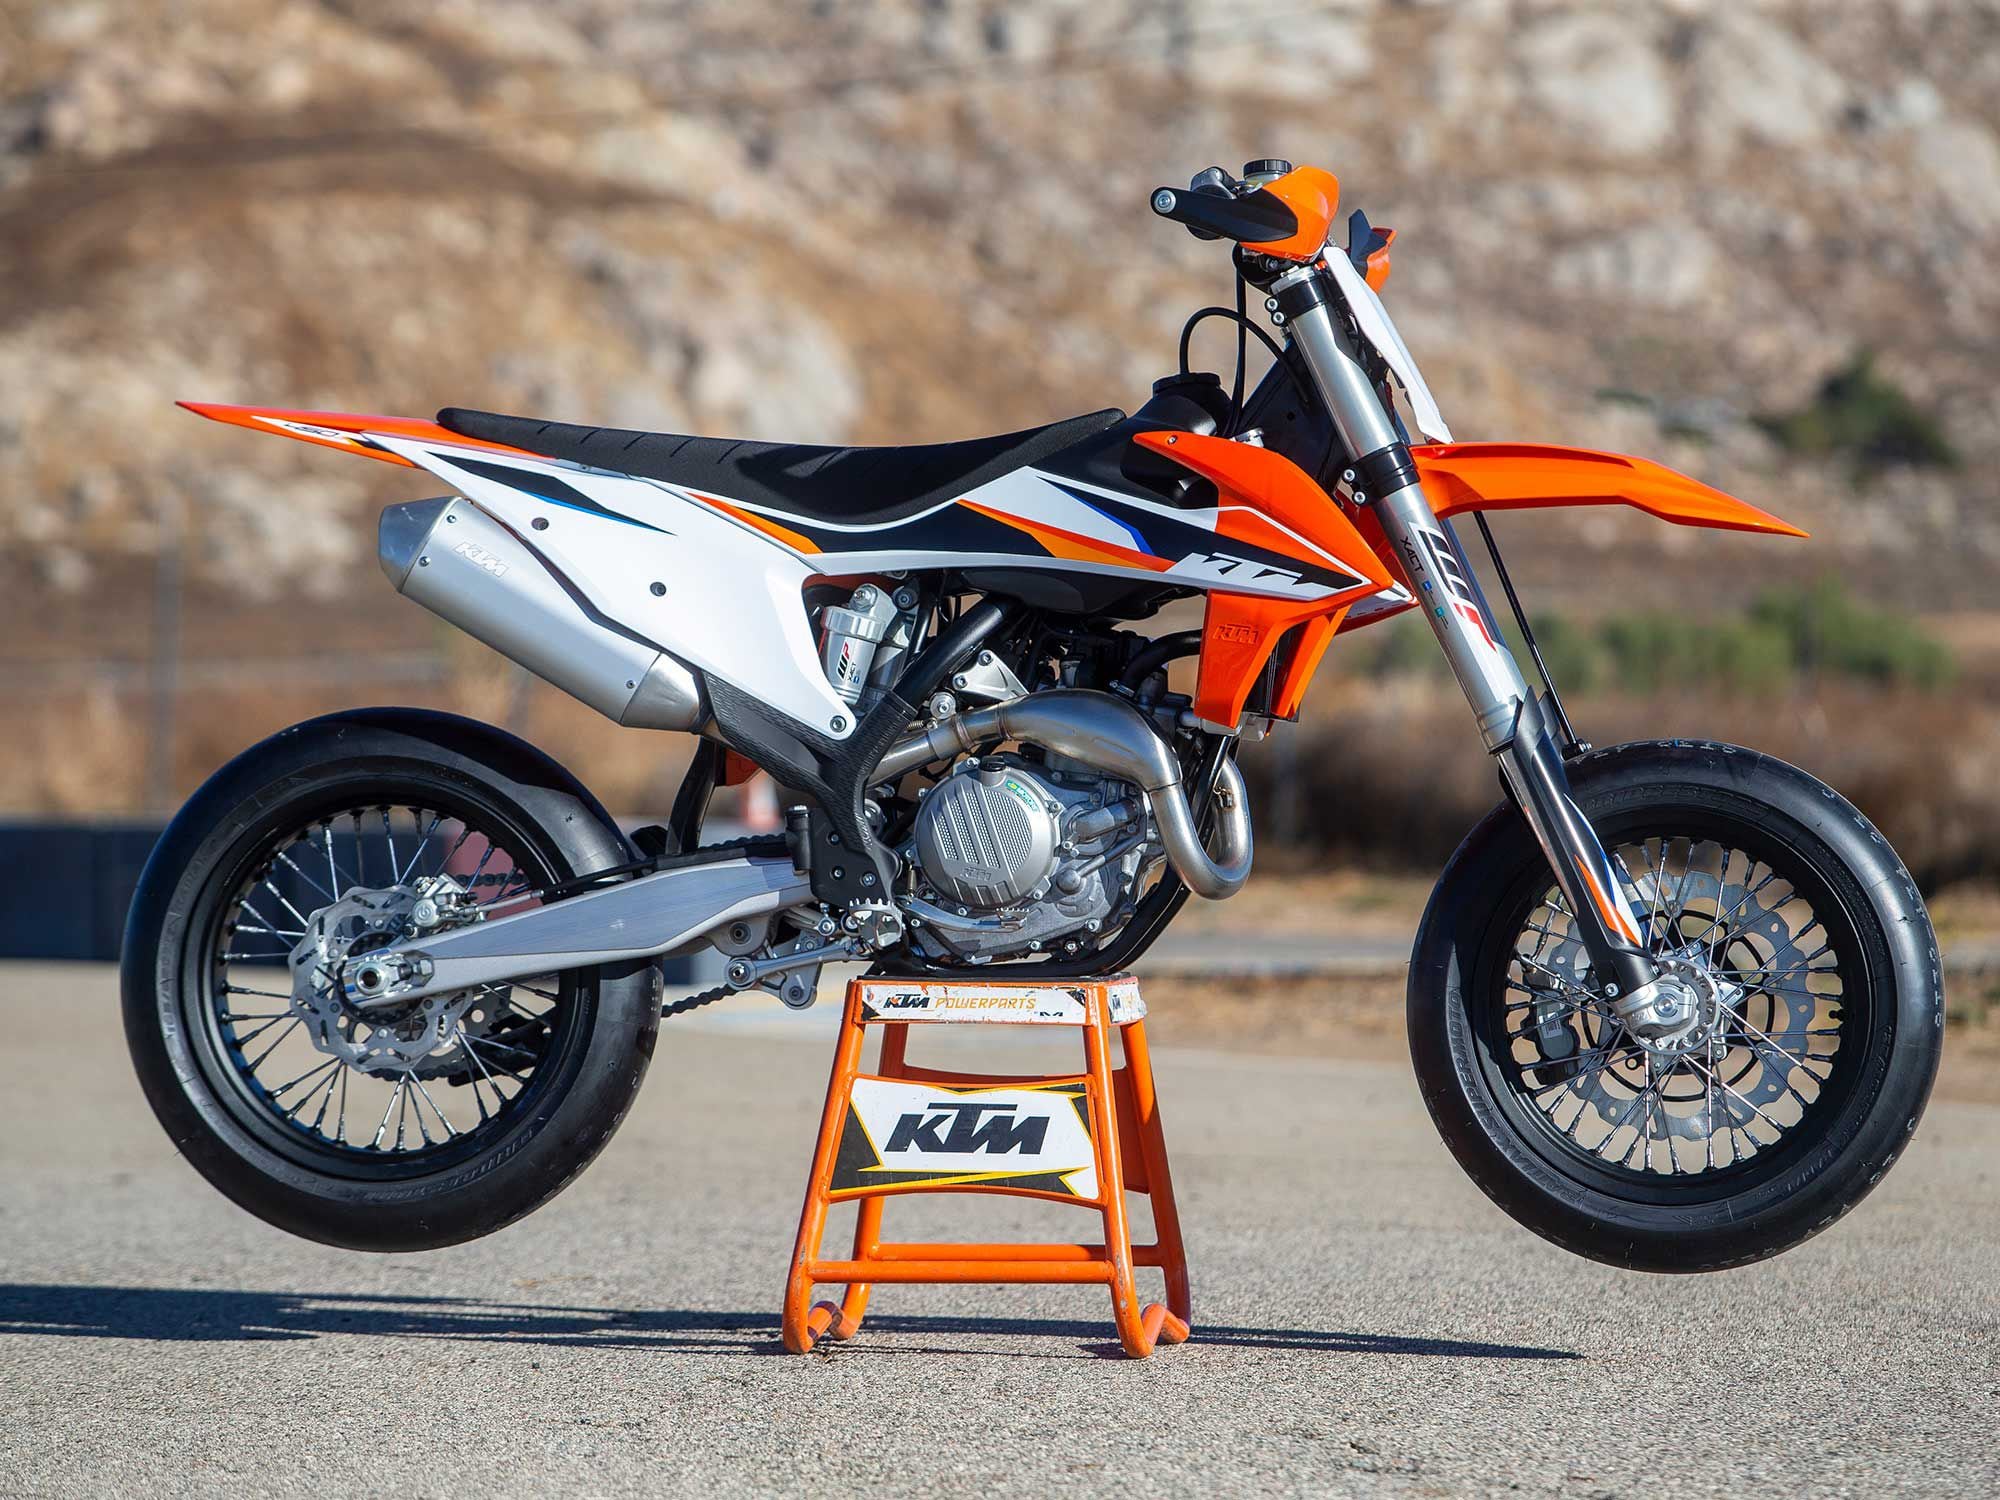 The 2021 KTM 450 SMR breaks the entry barriers to supermoto by offering a race-ready platform available at the dealership.